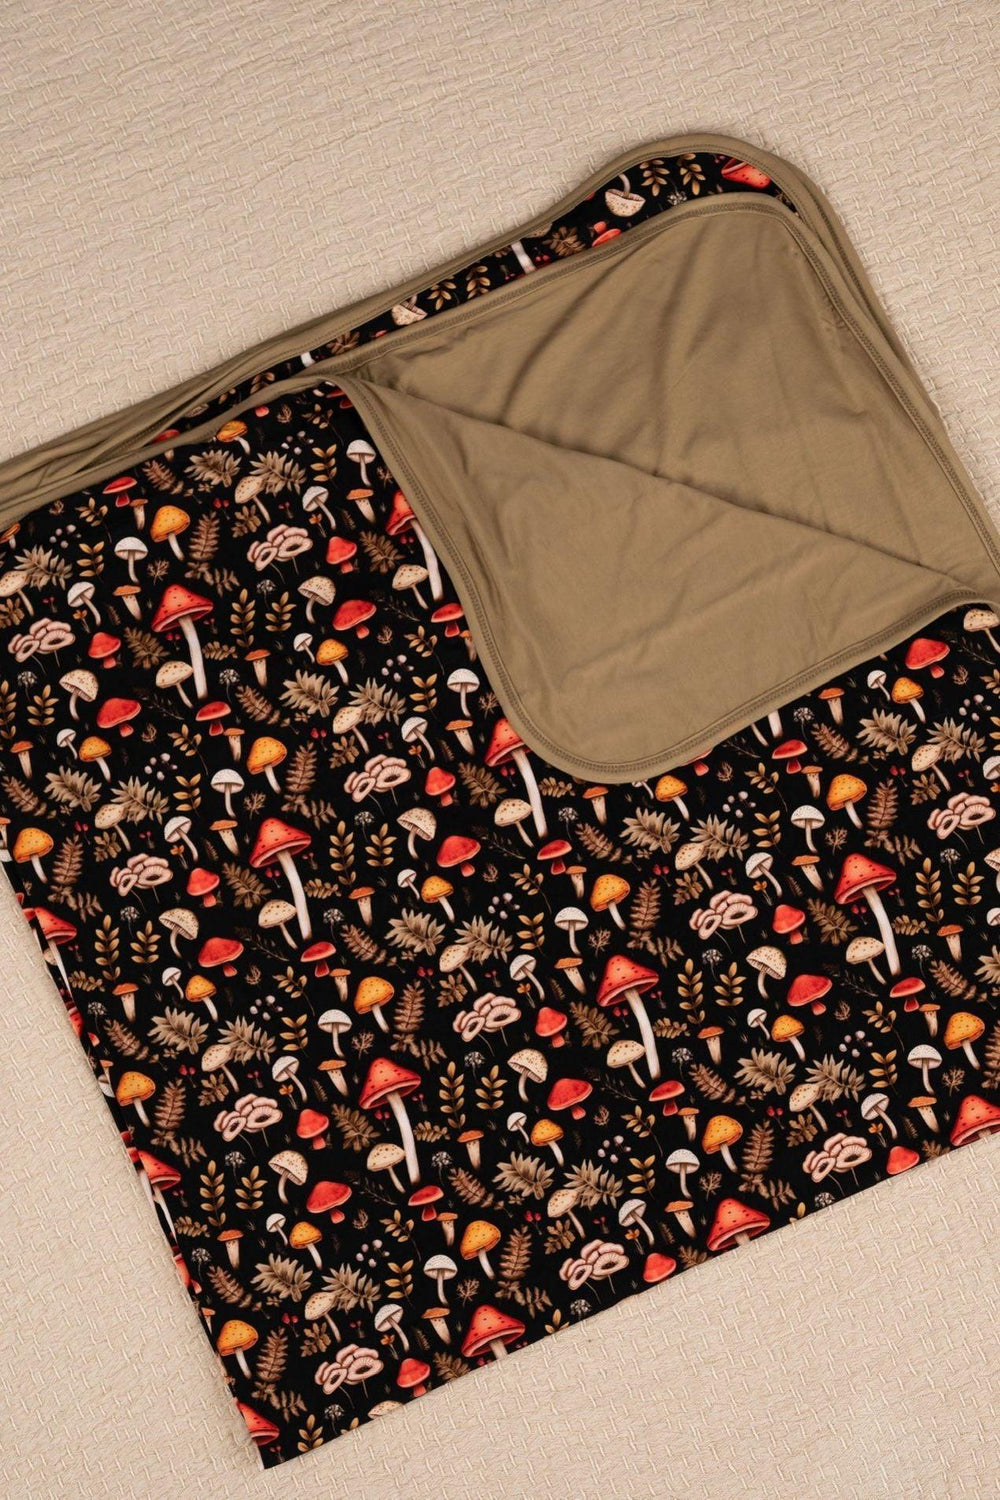 Bamboo Mushroom Blanket 50x50" - Eco-Friendly for All Ages - Sophia Rose Children's Boutique